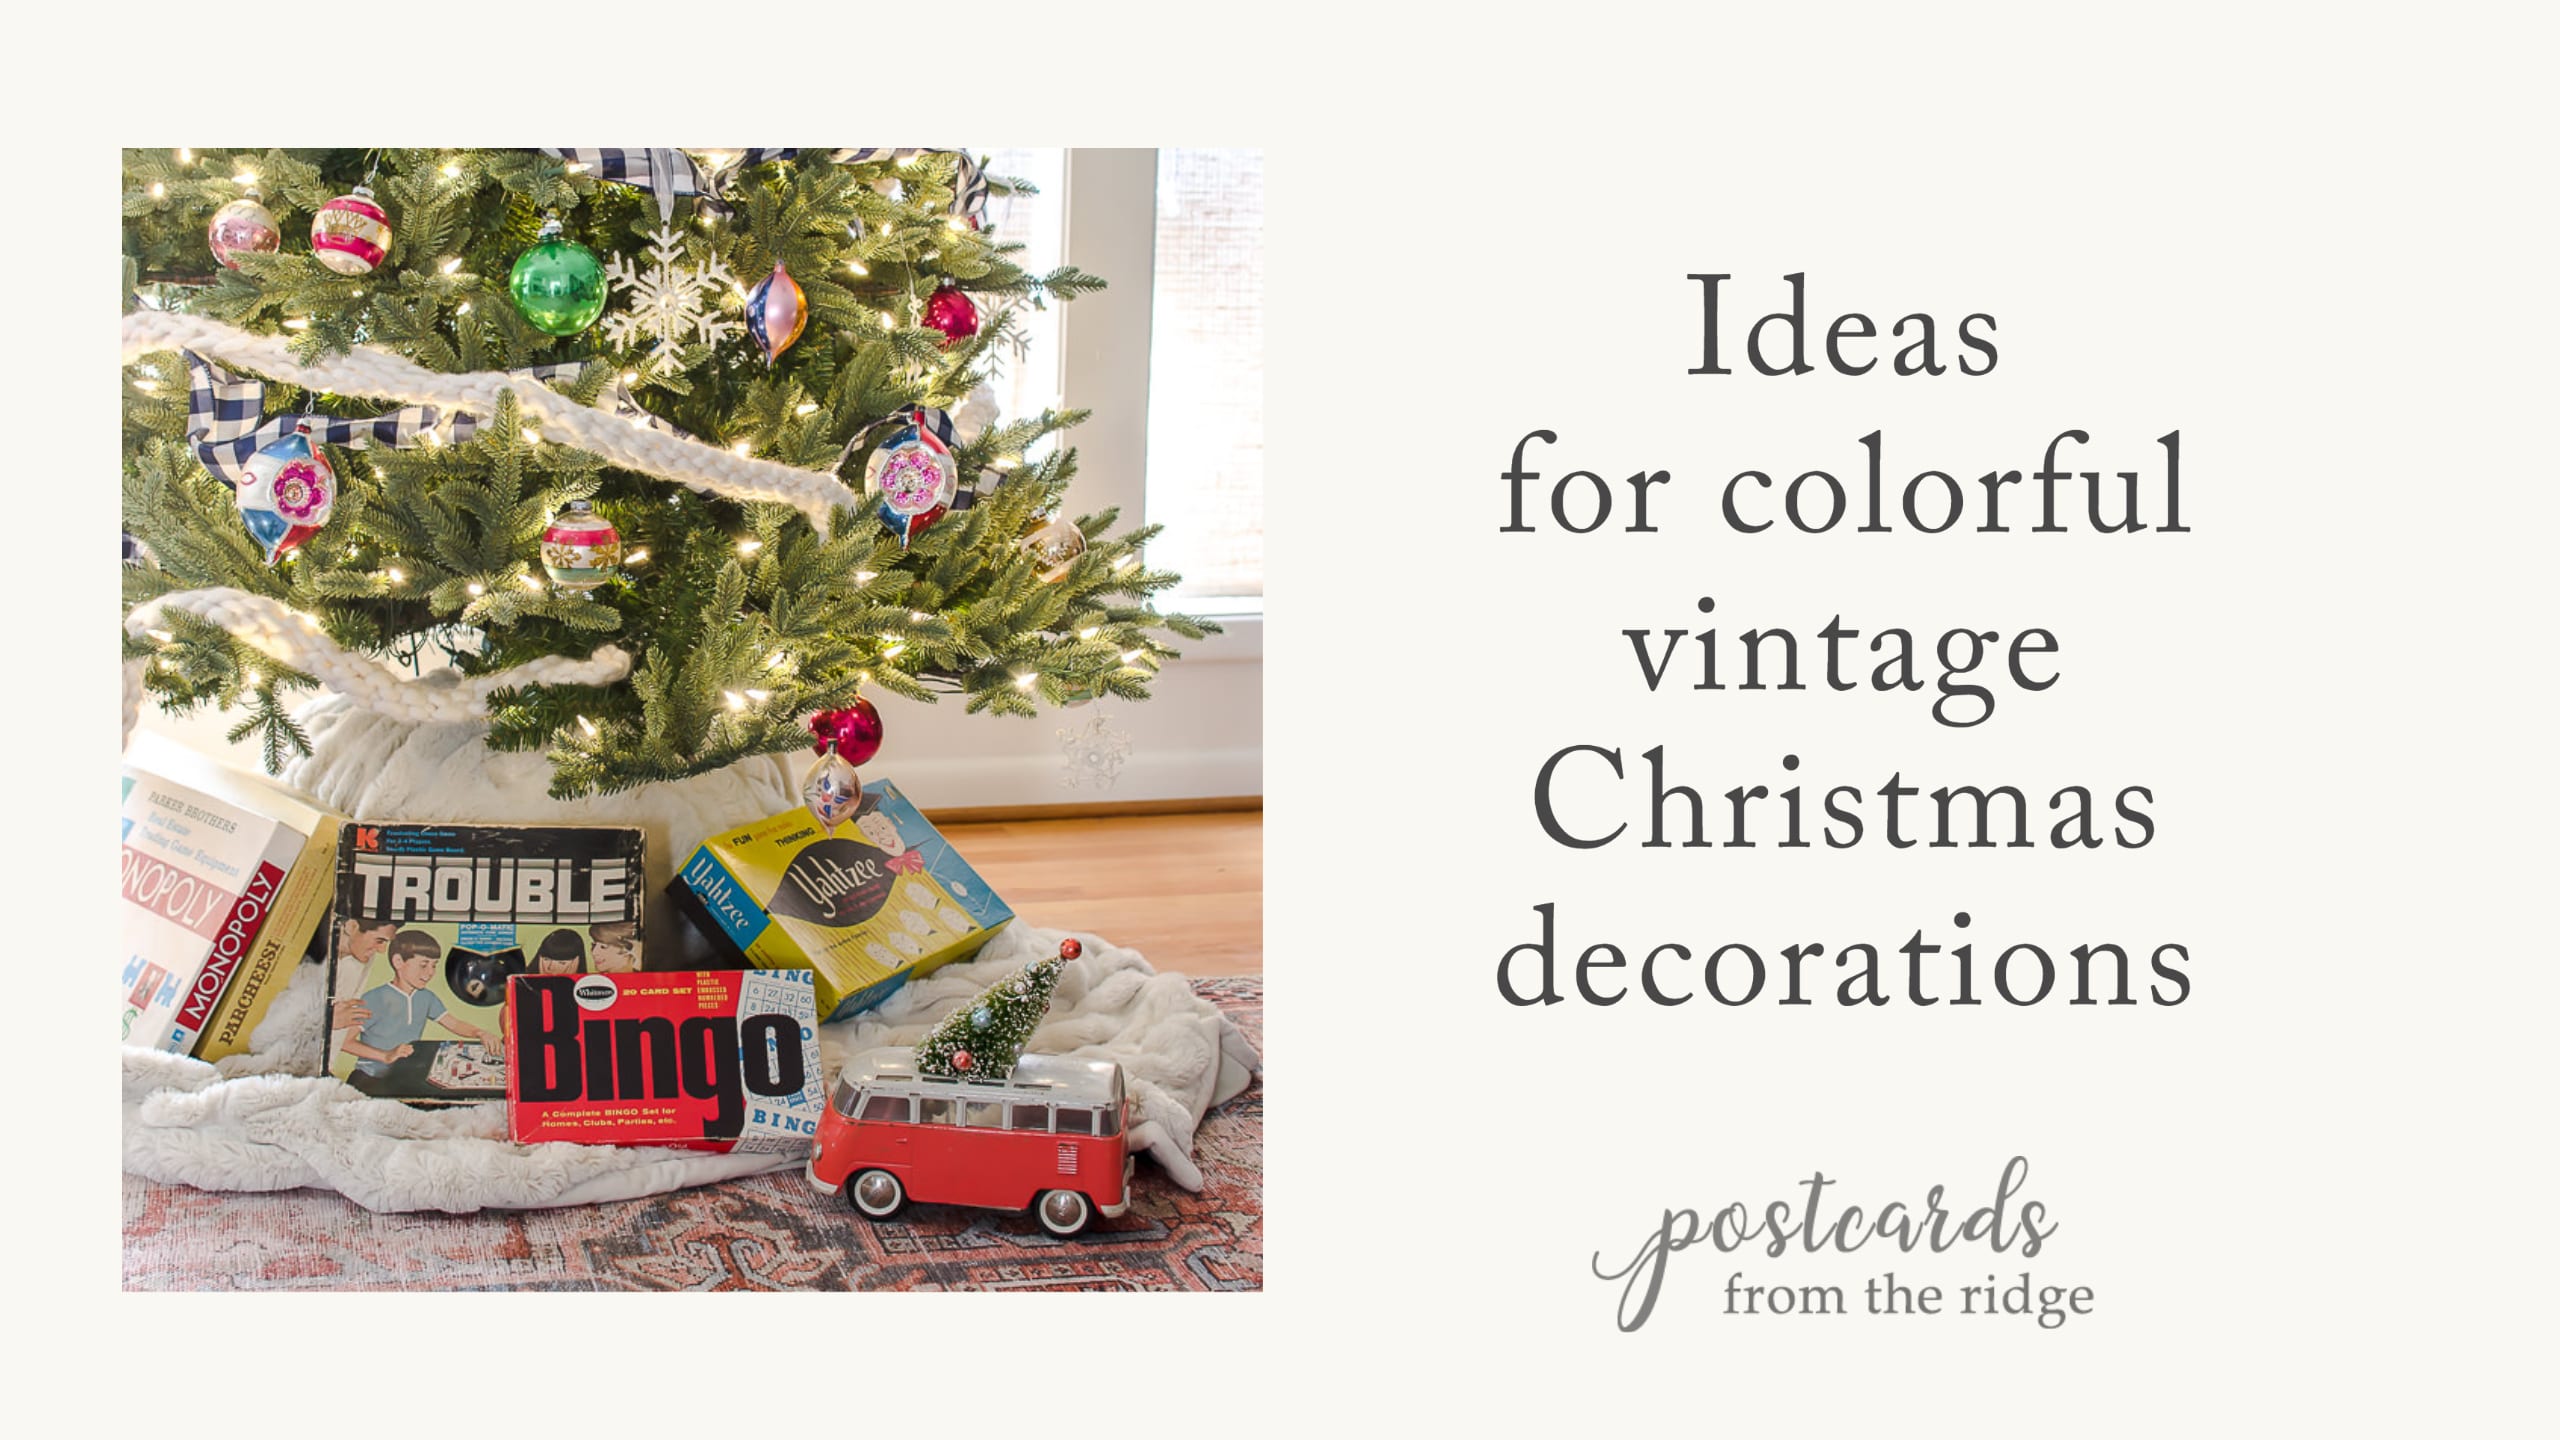 Colorful Vintage Christmas Decorations That Will Make You Smile - Postcards  from the Ridge